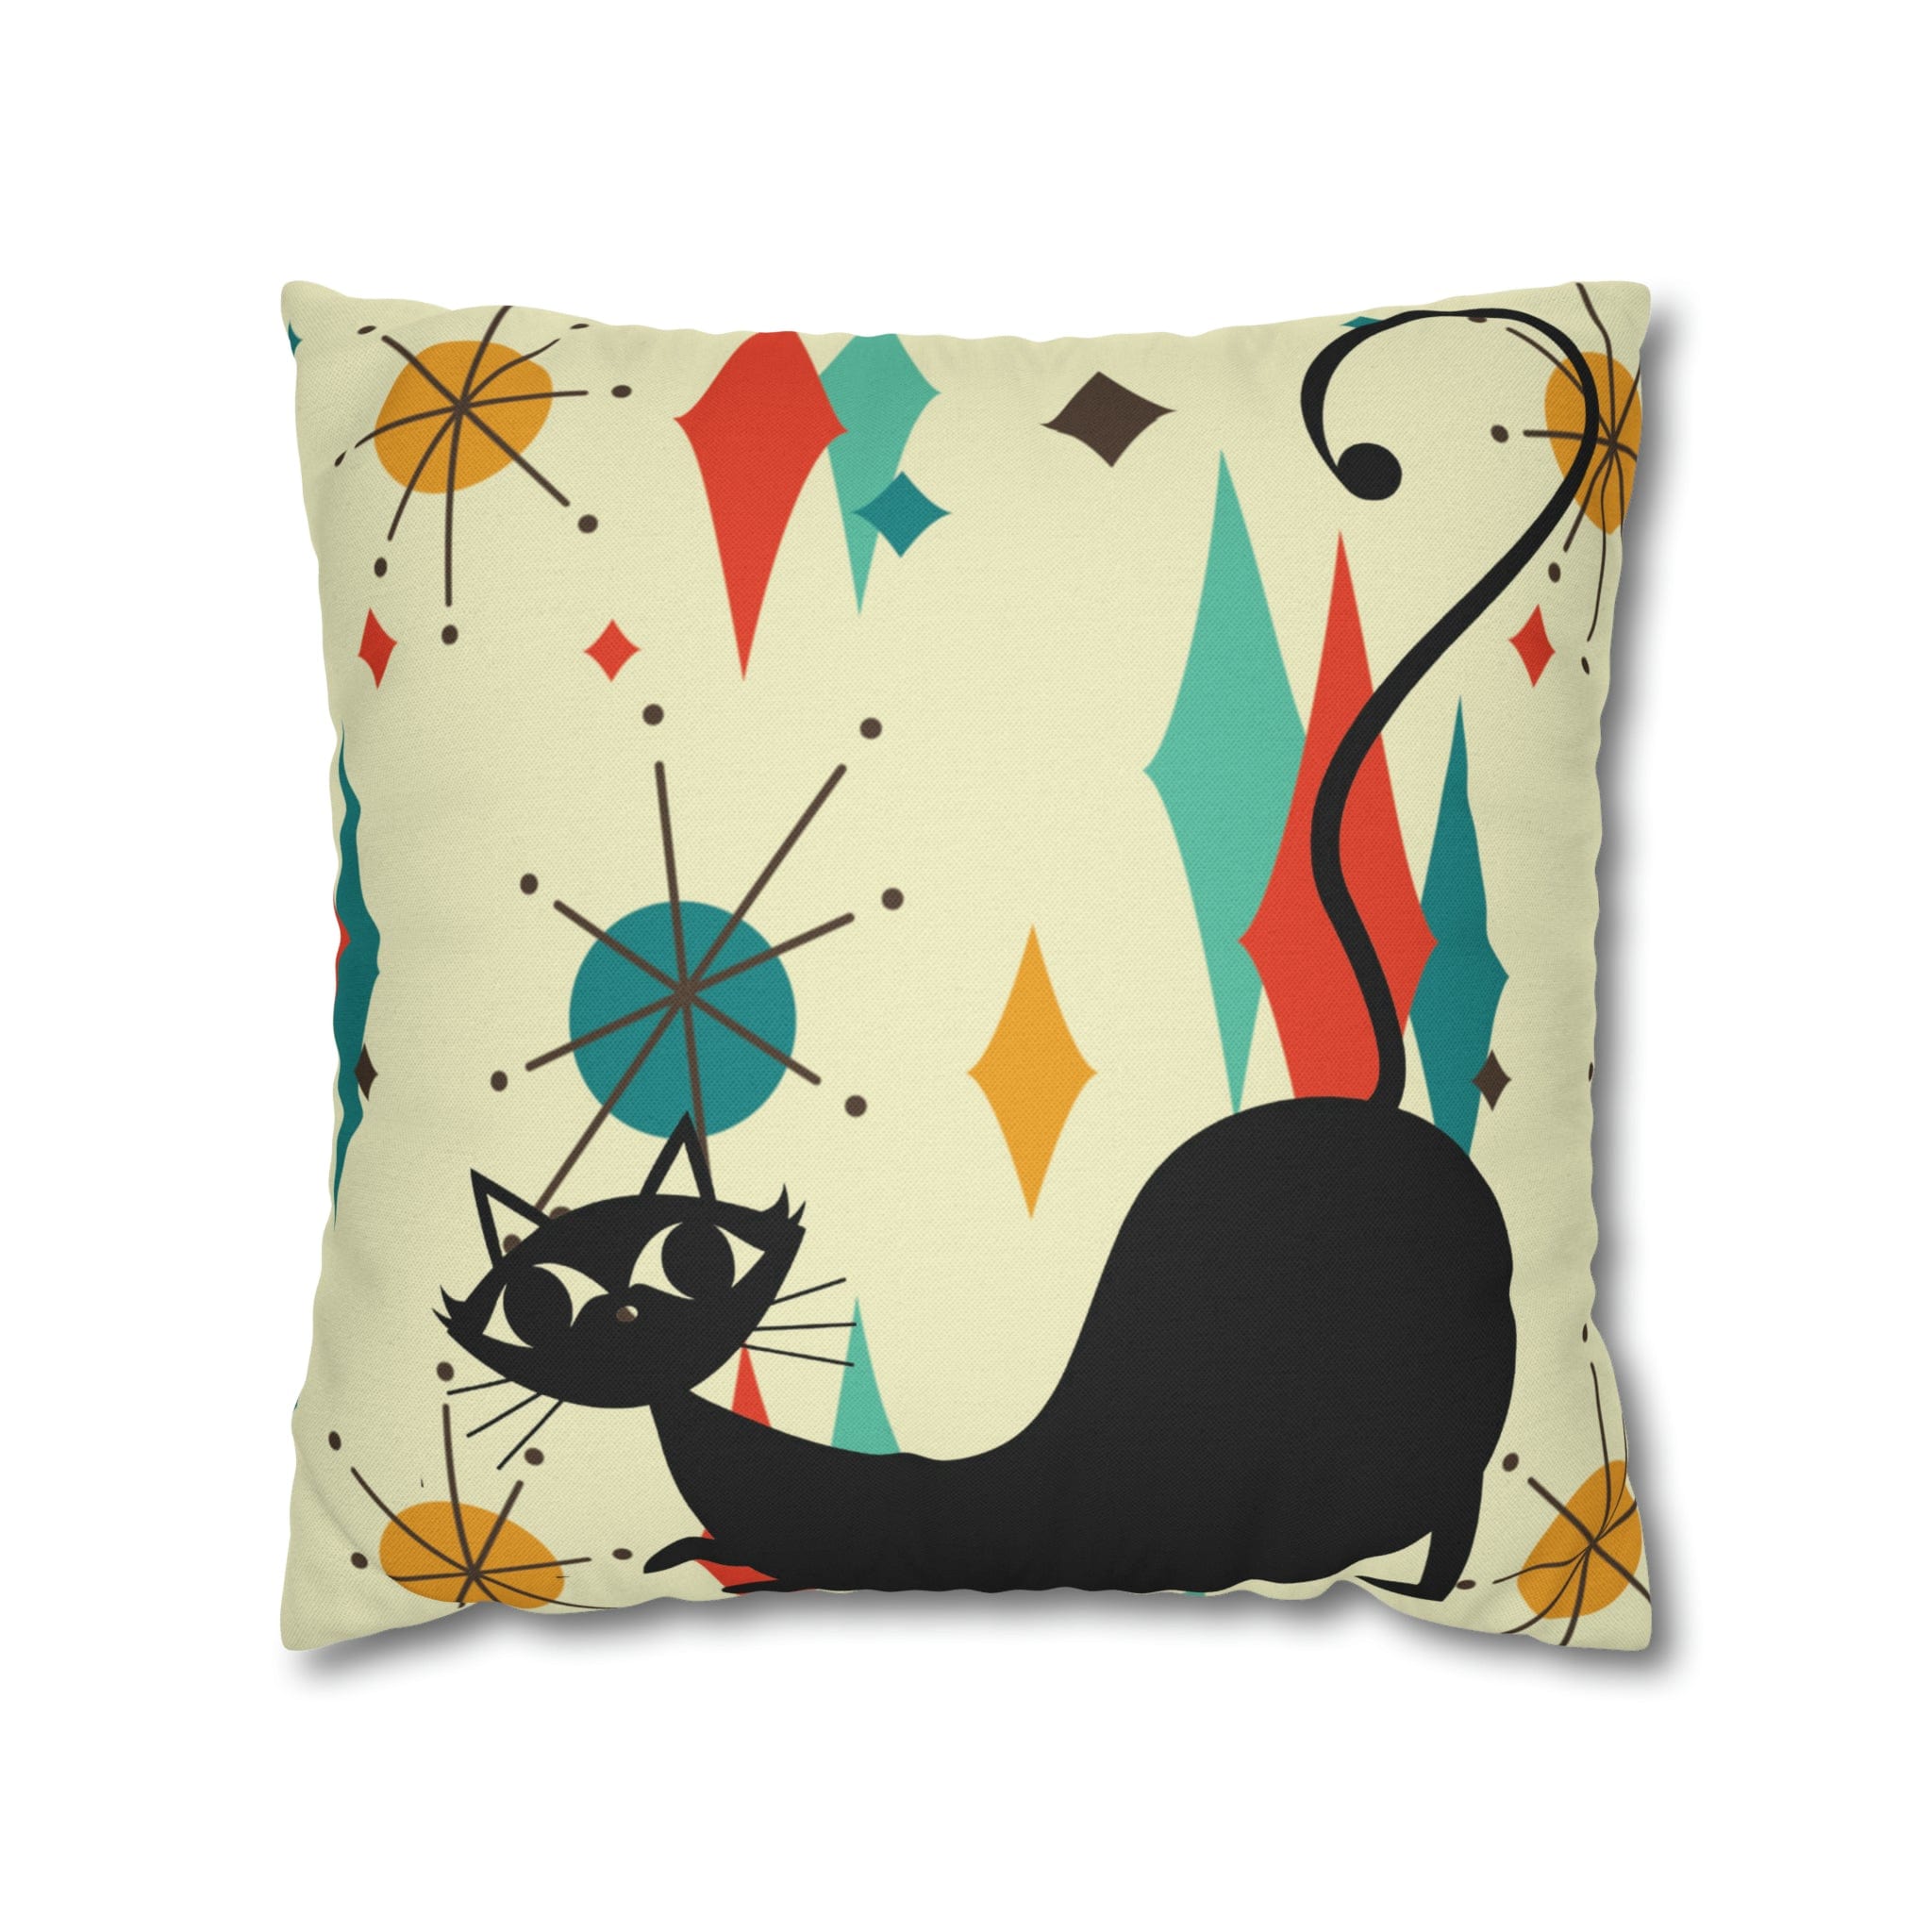 Kate McEnroe New York Retro Atomic Cat Franciscan Diamond Starburst Throw Pillow Covers in Mid Century Modern Orange, Teal, Cream Hues Throw Pillow Covers 18&quot; × 18&quot; 15946875490402798282